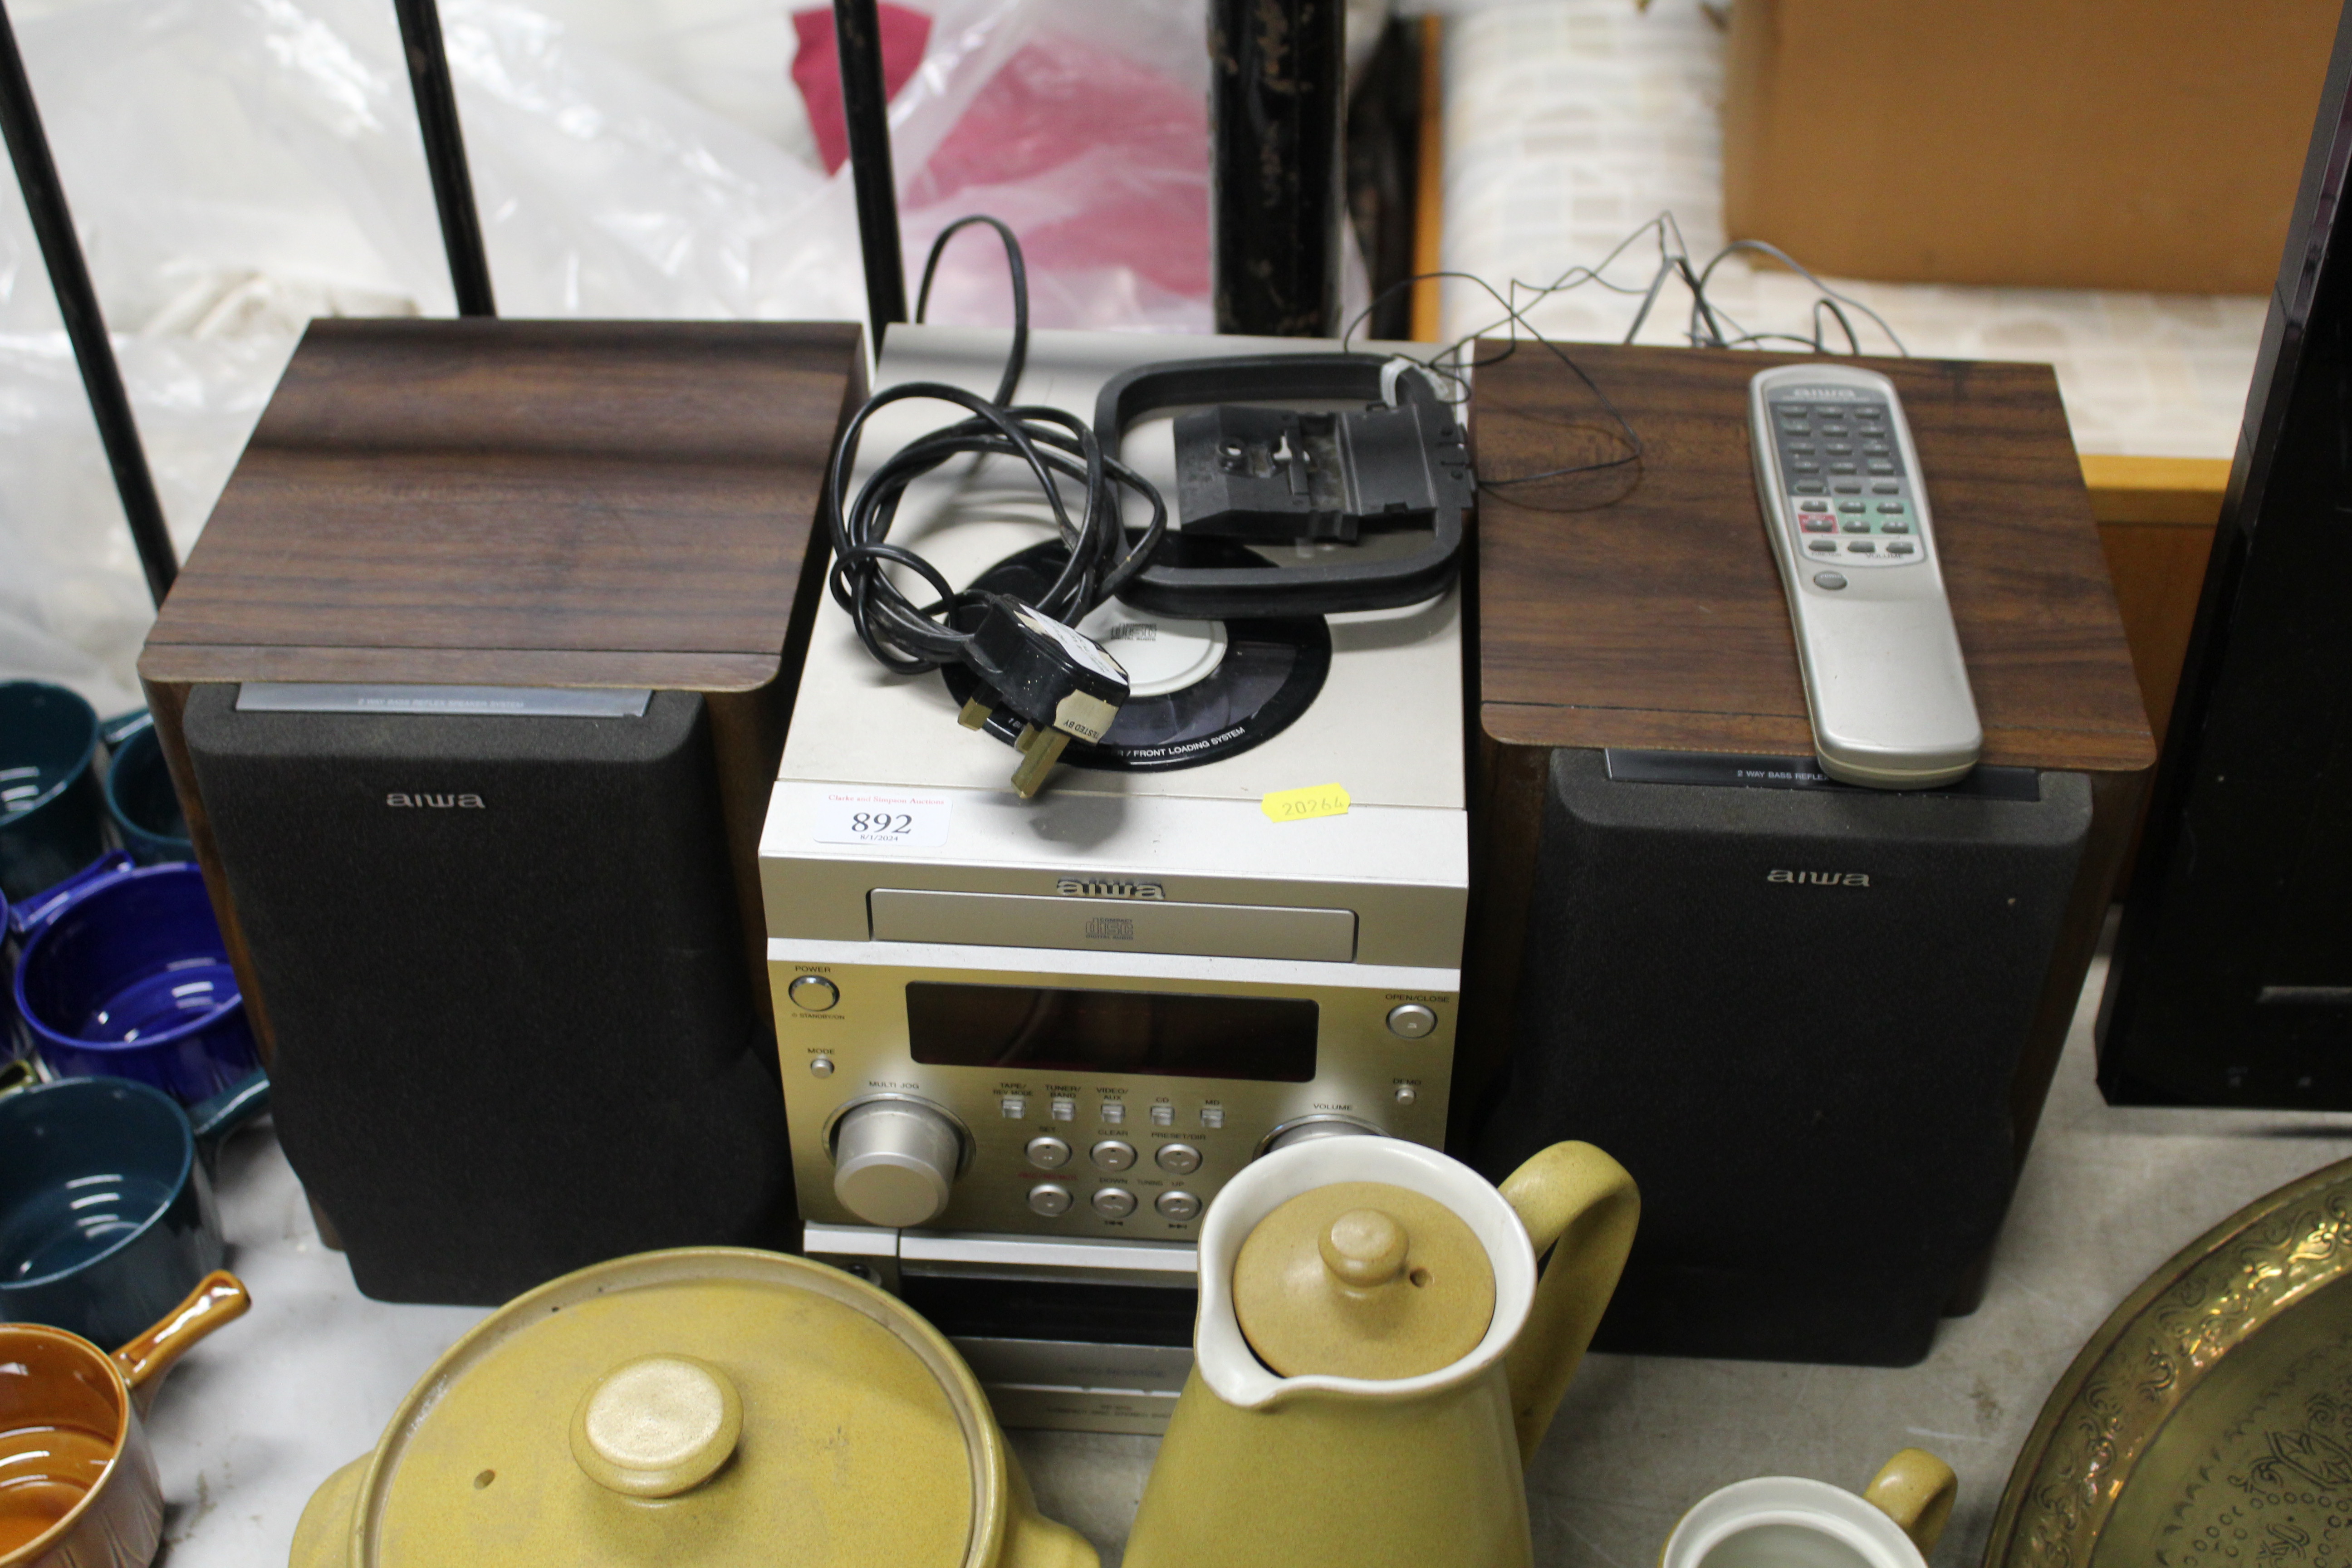 An Aiwa Hi-Fi with a pair of speakers and remote control